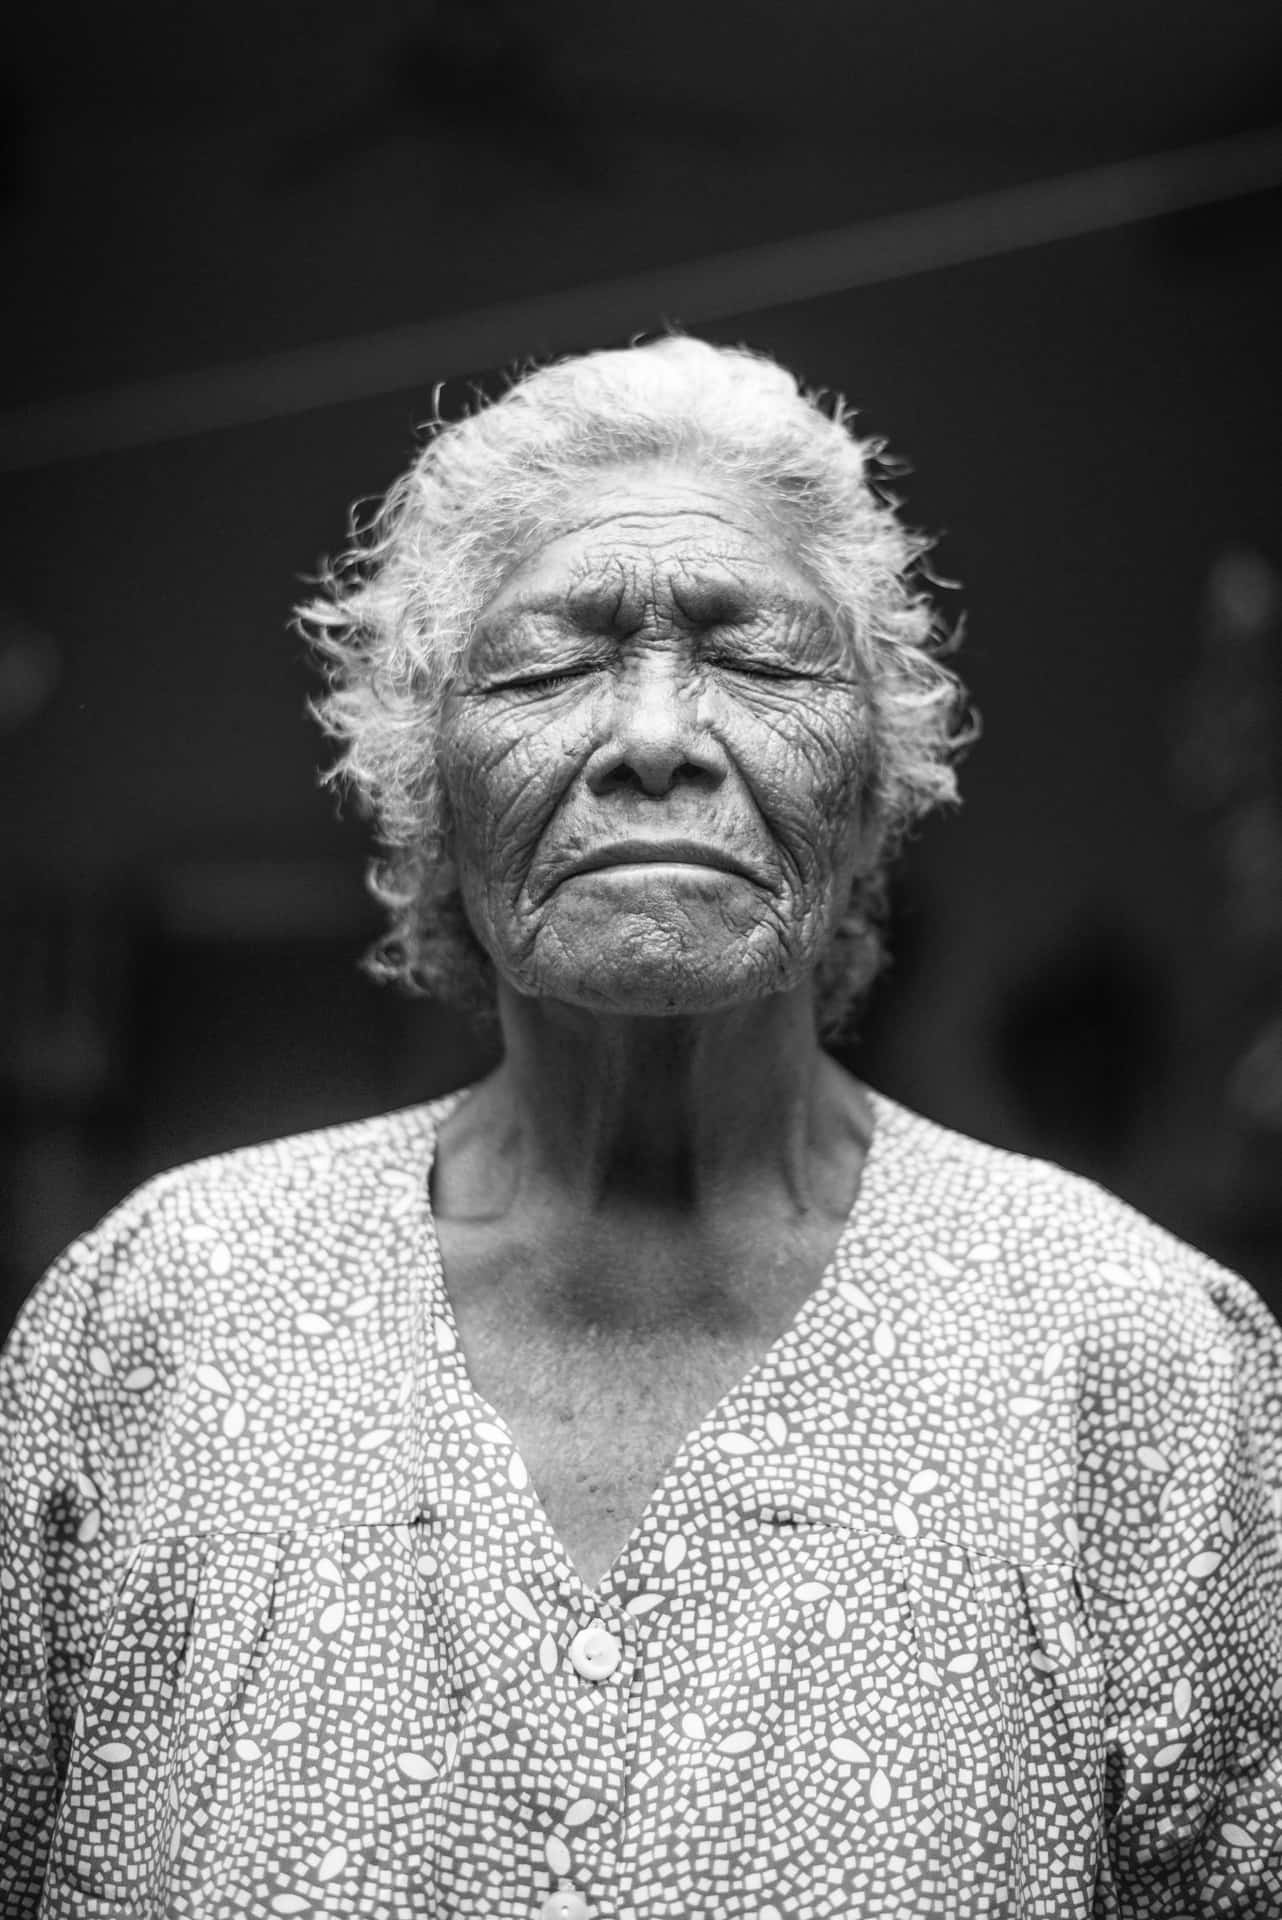 Mature Old Woman Closing Her Eyes